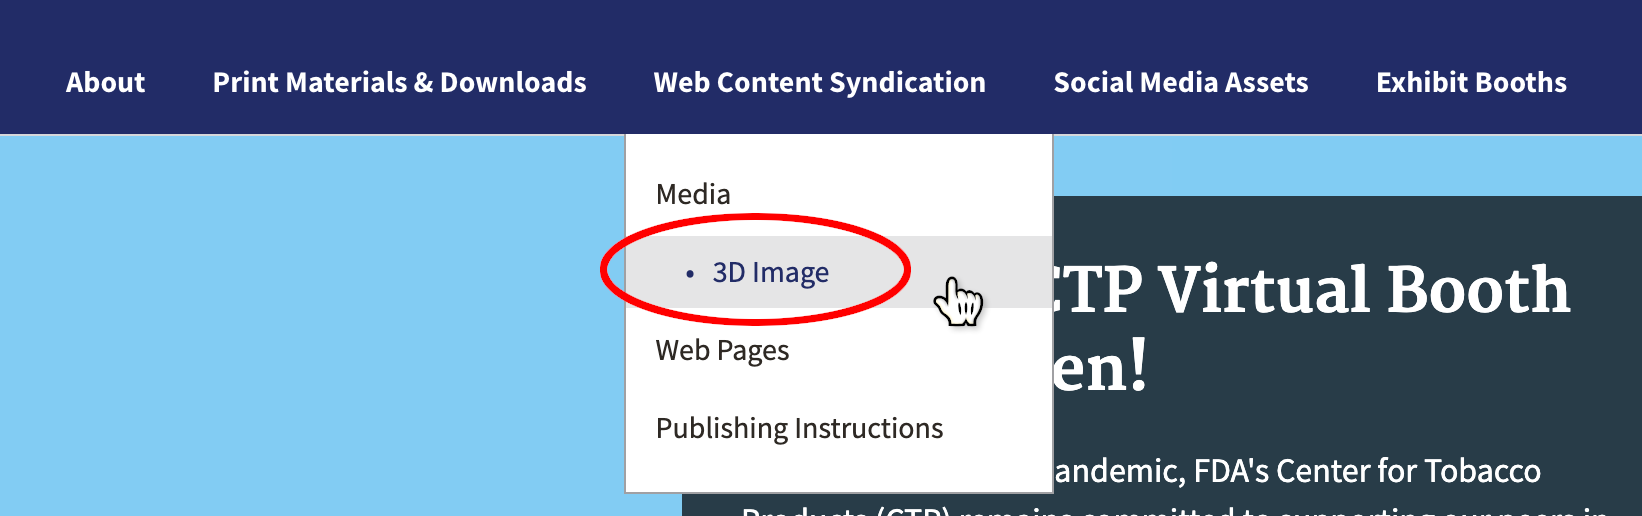 Link: Embed Web Content - 3D Image